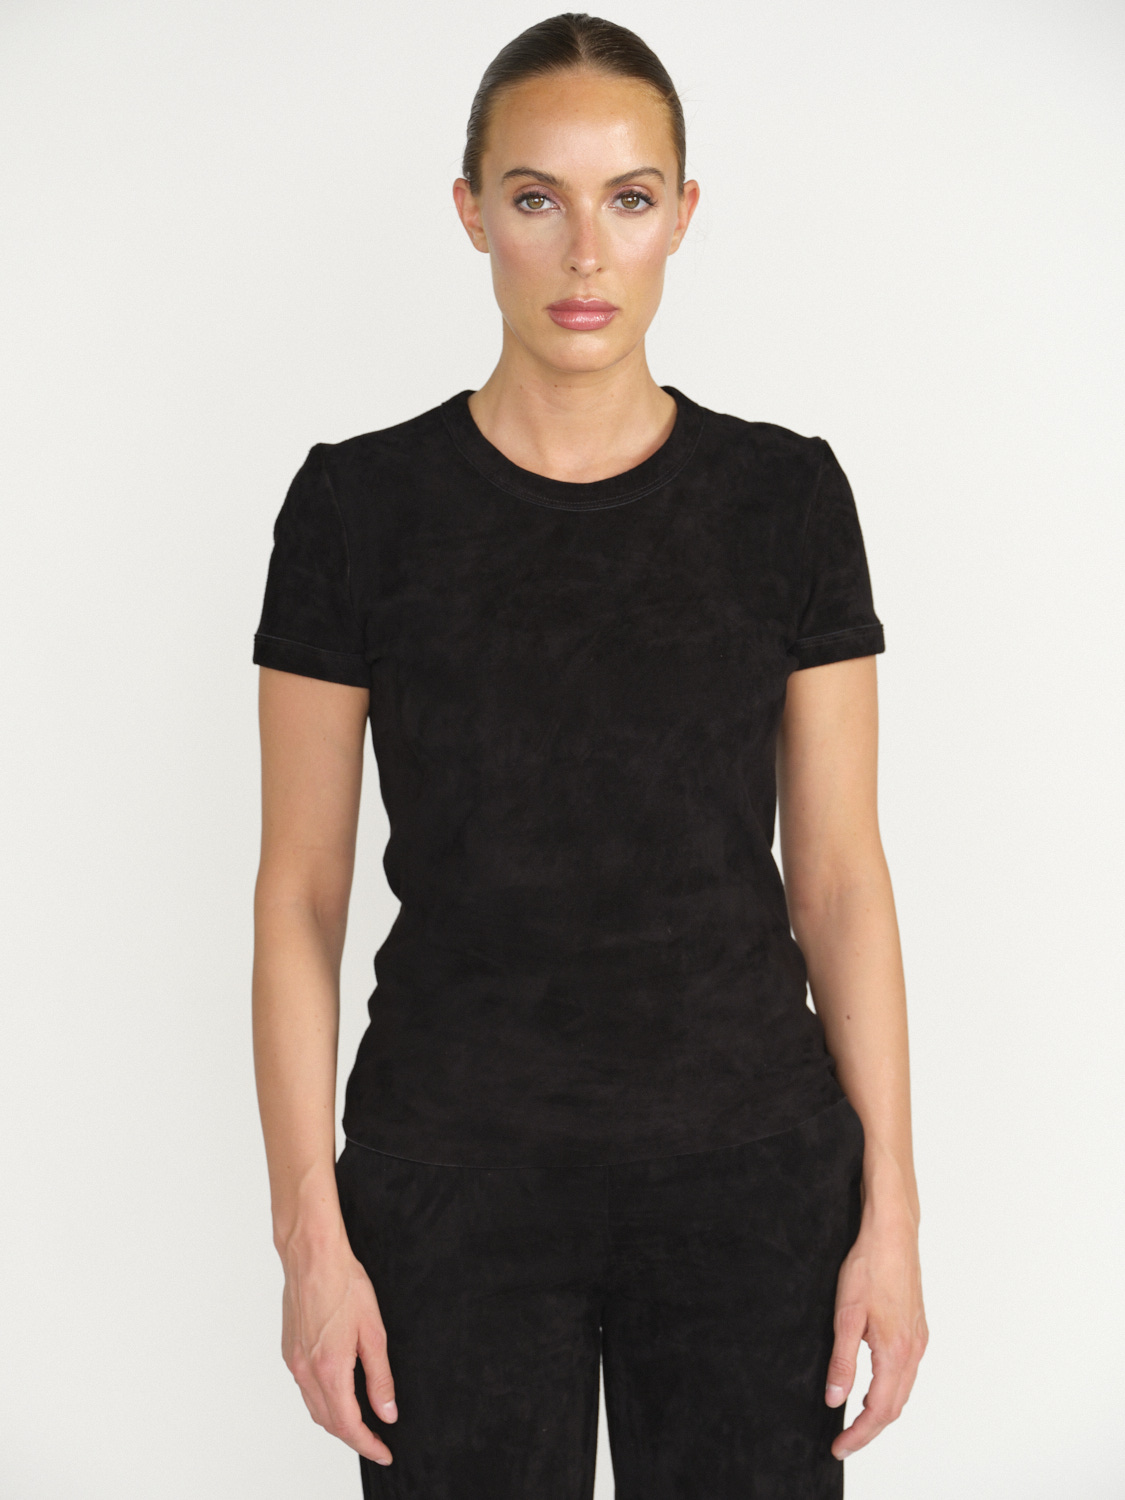 Stouls Stouls 05 - Leather T-Shirt with round neck black M